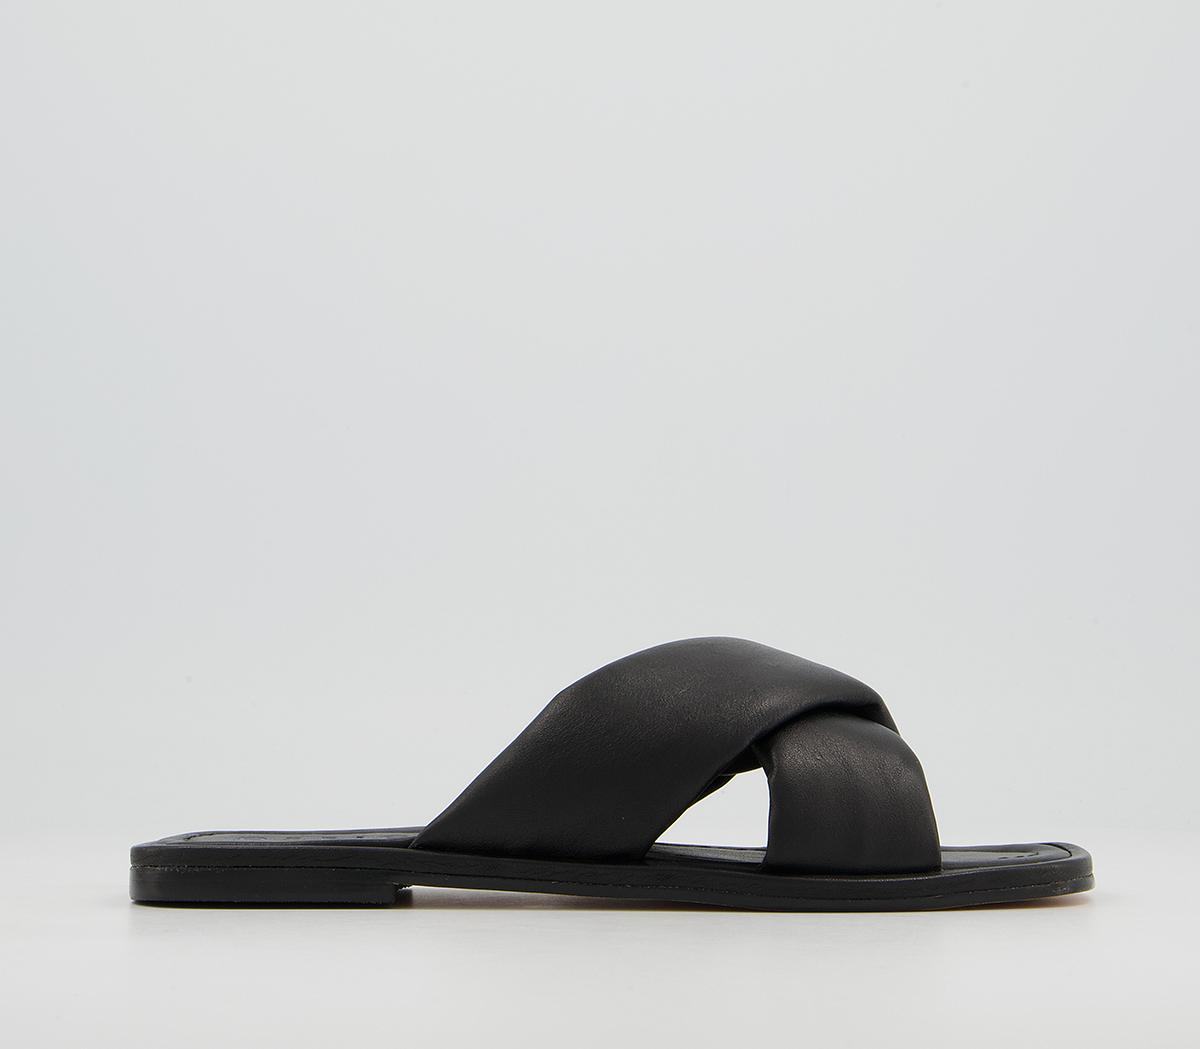 OFFICESecretive Padded Cross Strap MulesBlack Leather